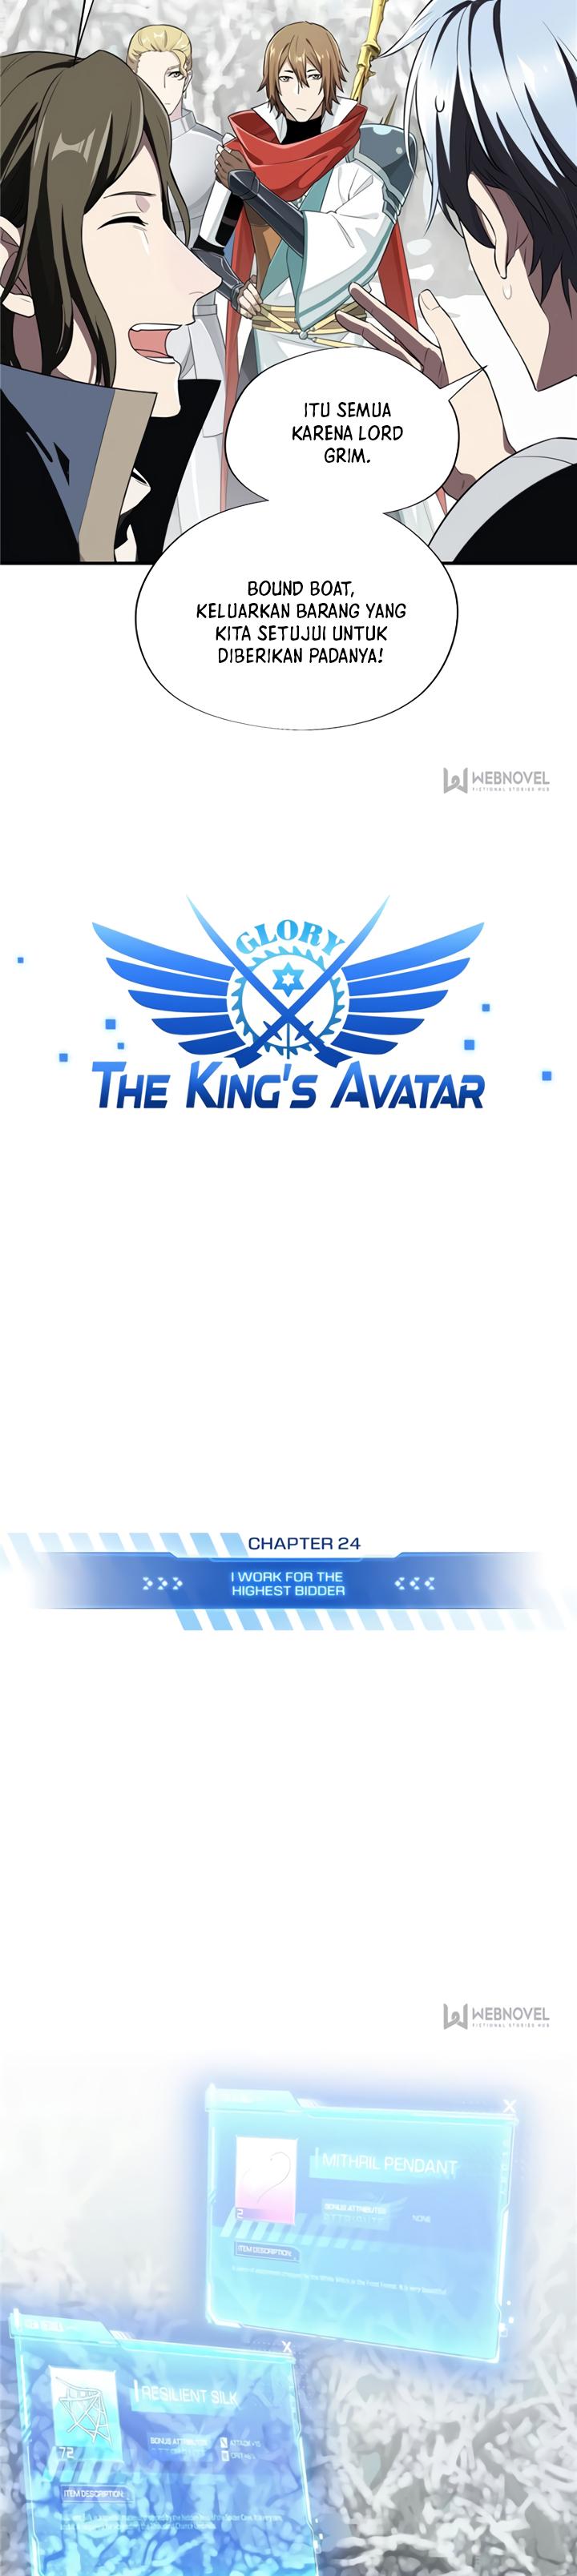 The King’s Avatar (2020) Chapter 24